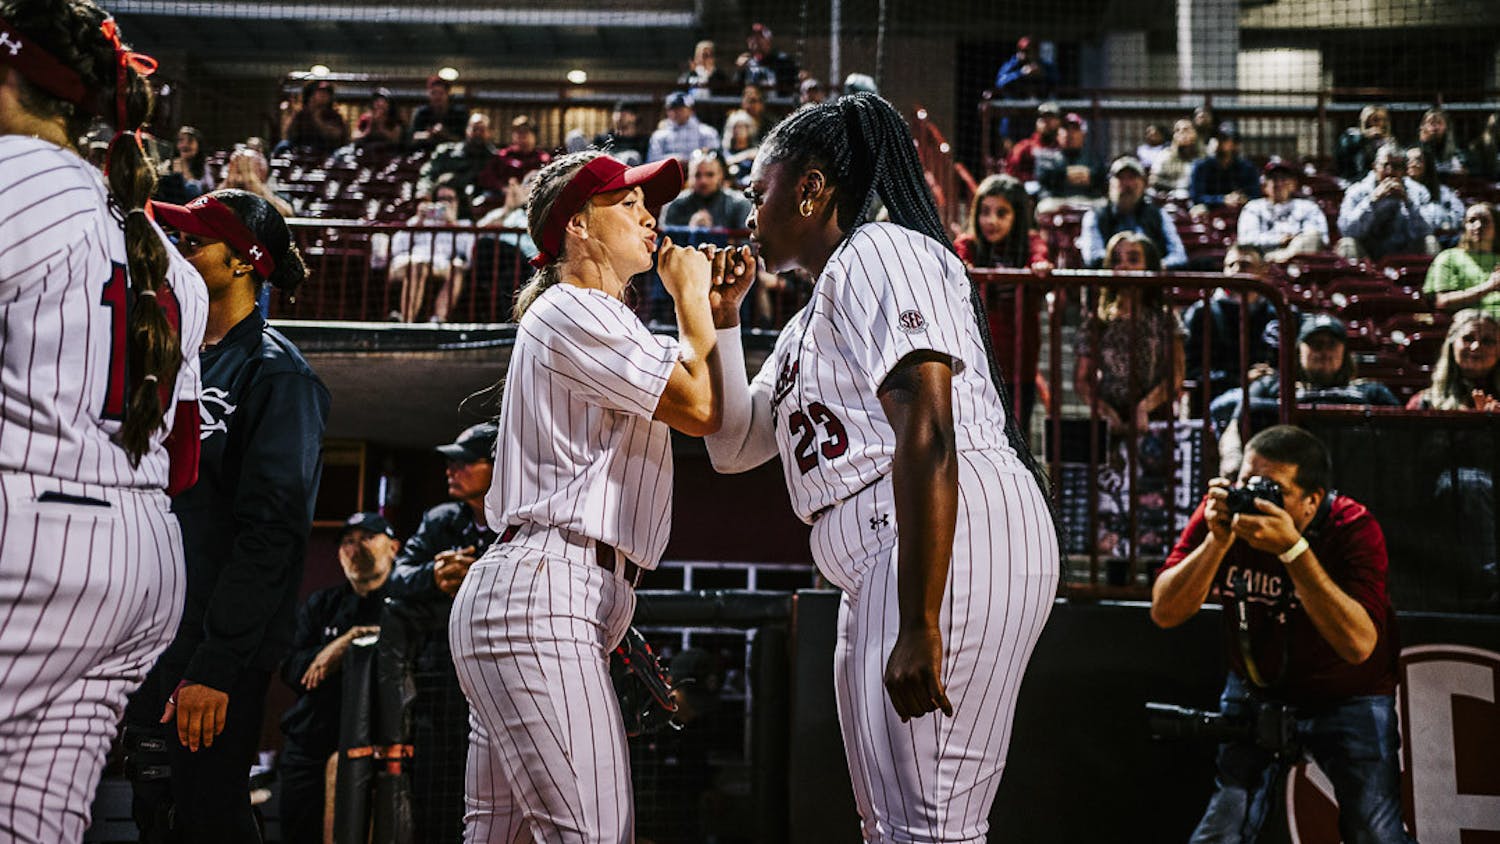 The South Carolina softball team started it's home slate off with a 8-0, six-inning win against the College of Charleston at Carolina Softball Stadium at Beckham Field on Feb. 15, 2023. The Gamecocks had an aggressive offense and an ironclad defense, only allowing the Cougars three hits in the entire game. The Gamecocks move on to play East Tennessee State on Feb. 16, 2023.&nbsp;